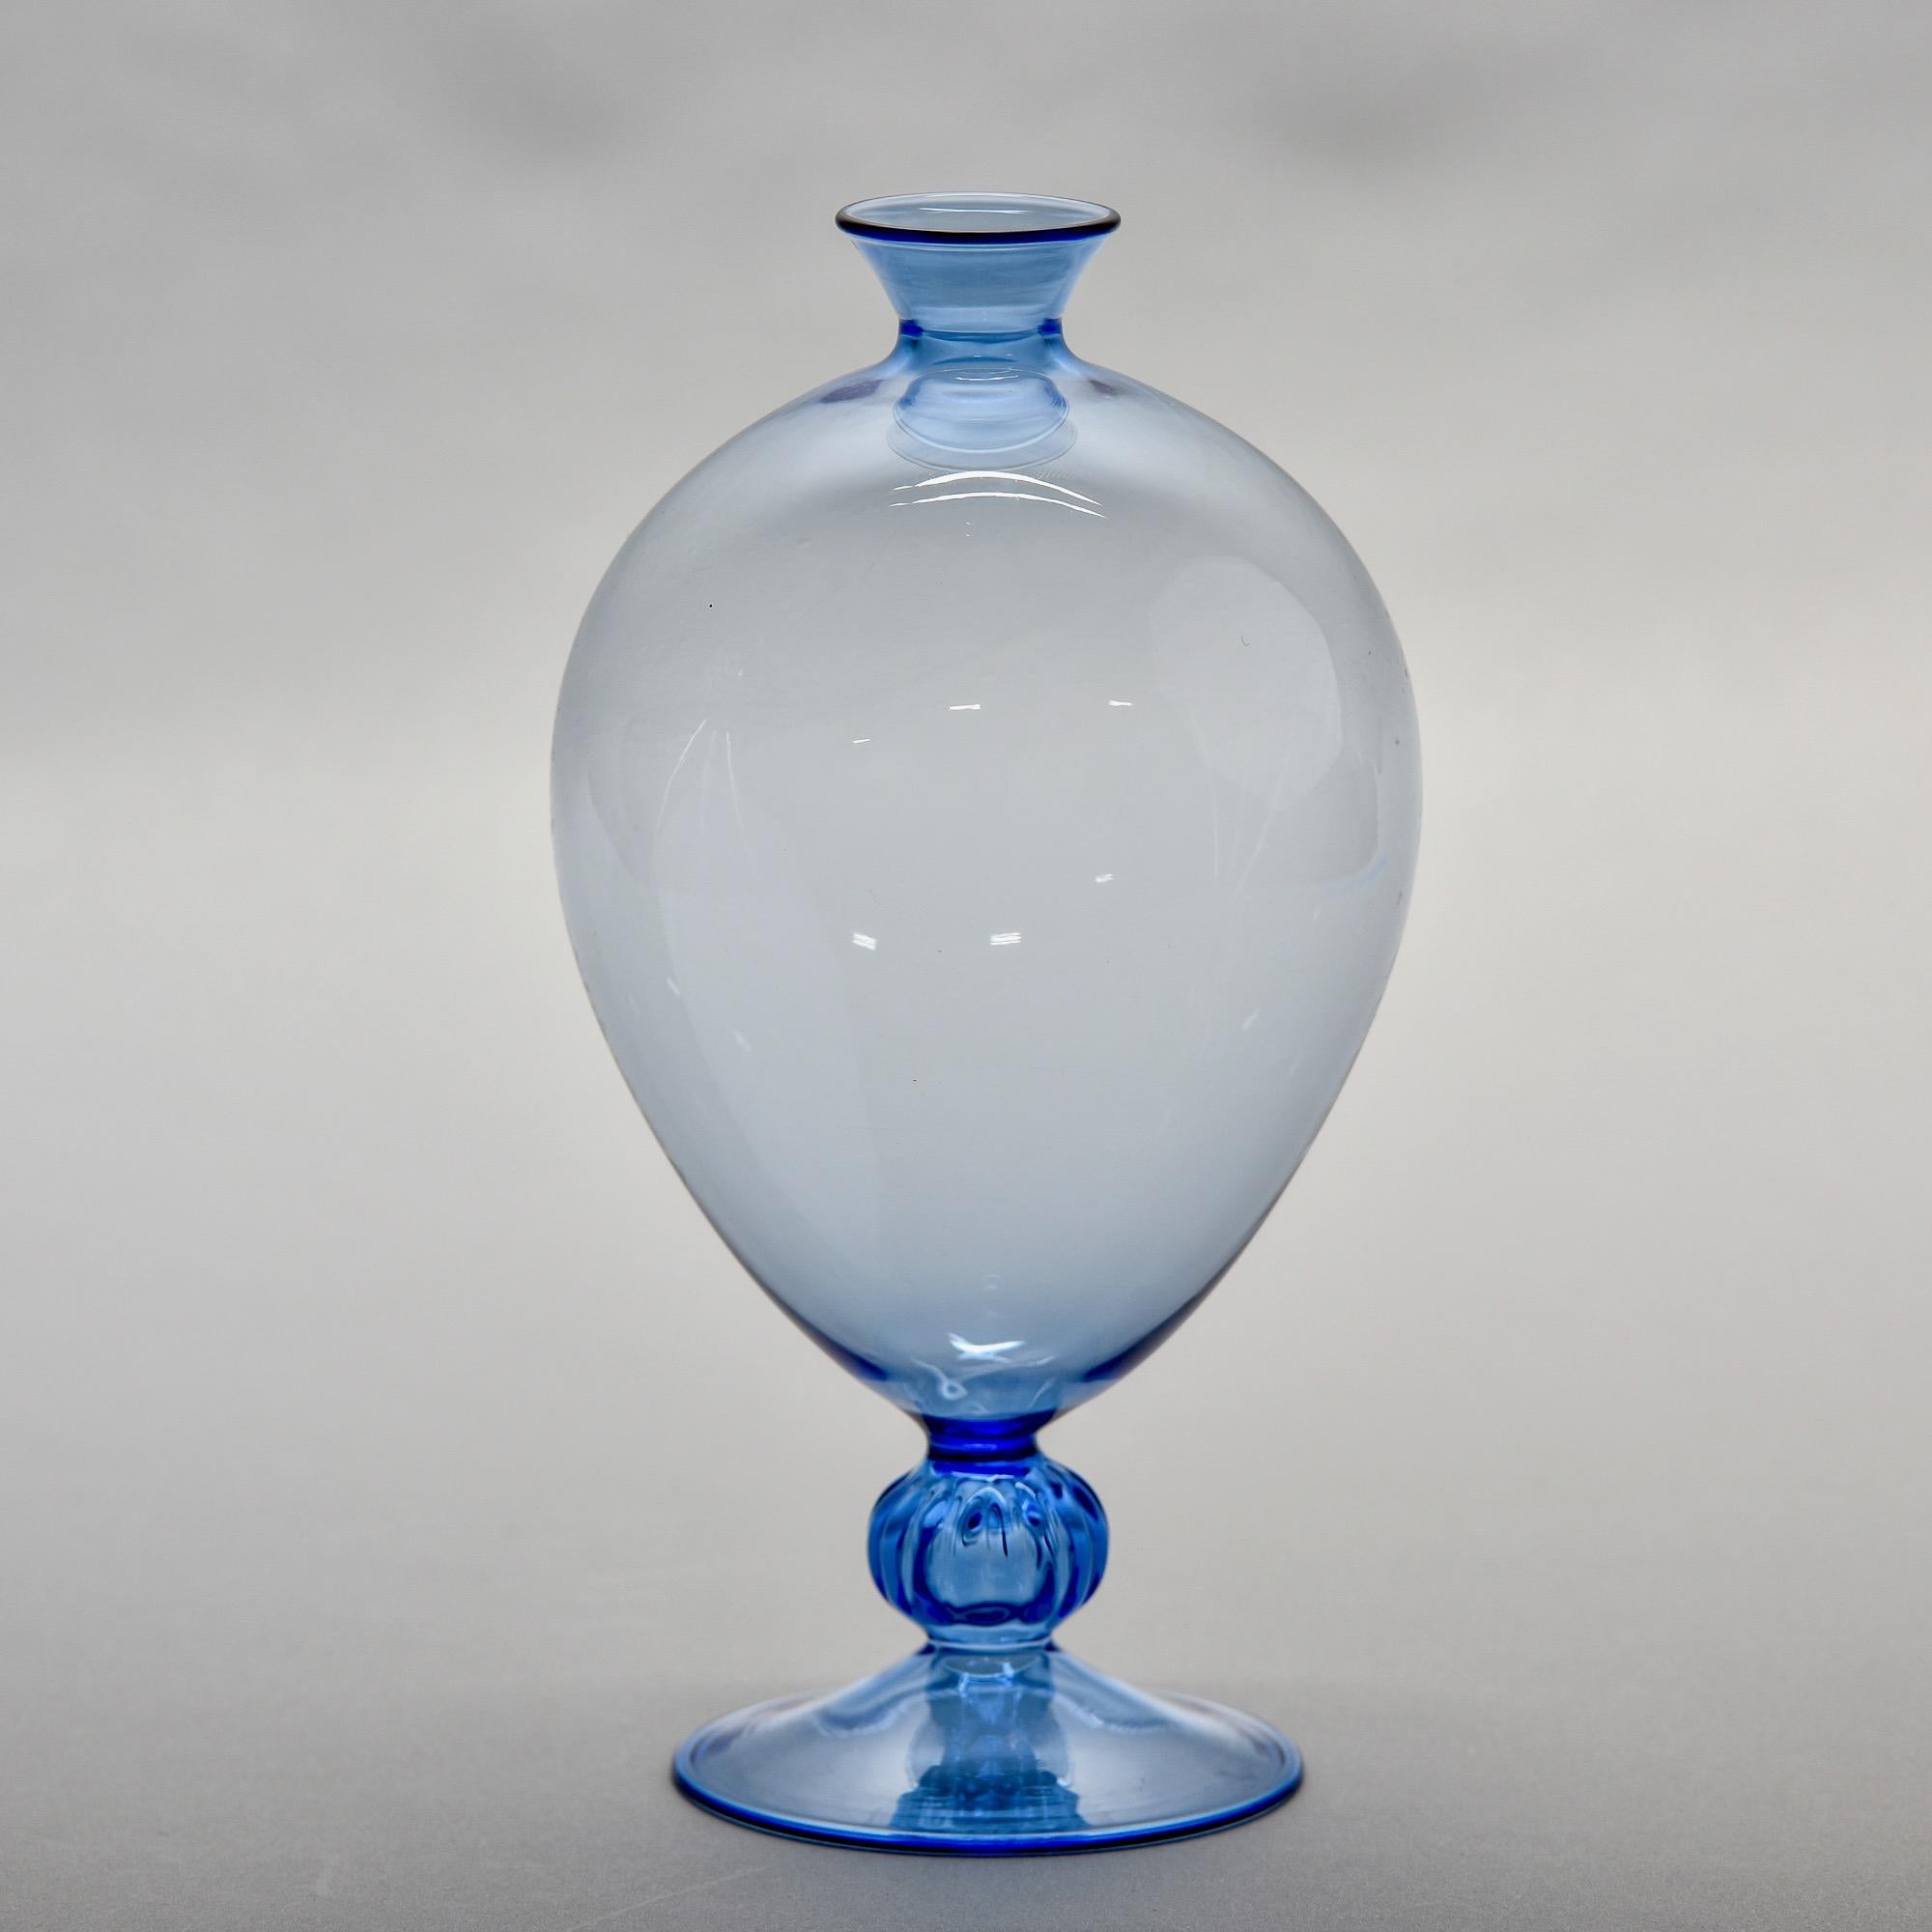 New Murano glass mouth blown pedestal vase in blue. Very thin-walled blown glass with round body and thin neck and mouth. Unsigned. 

New with no flaws found.